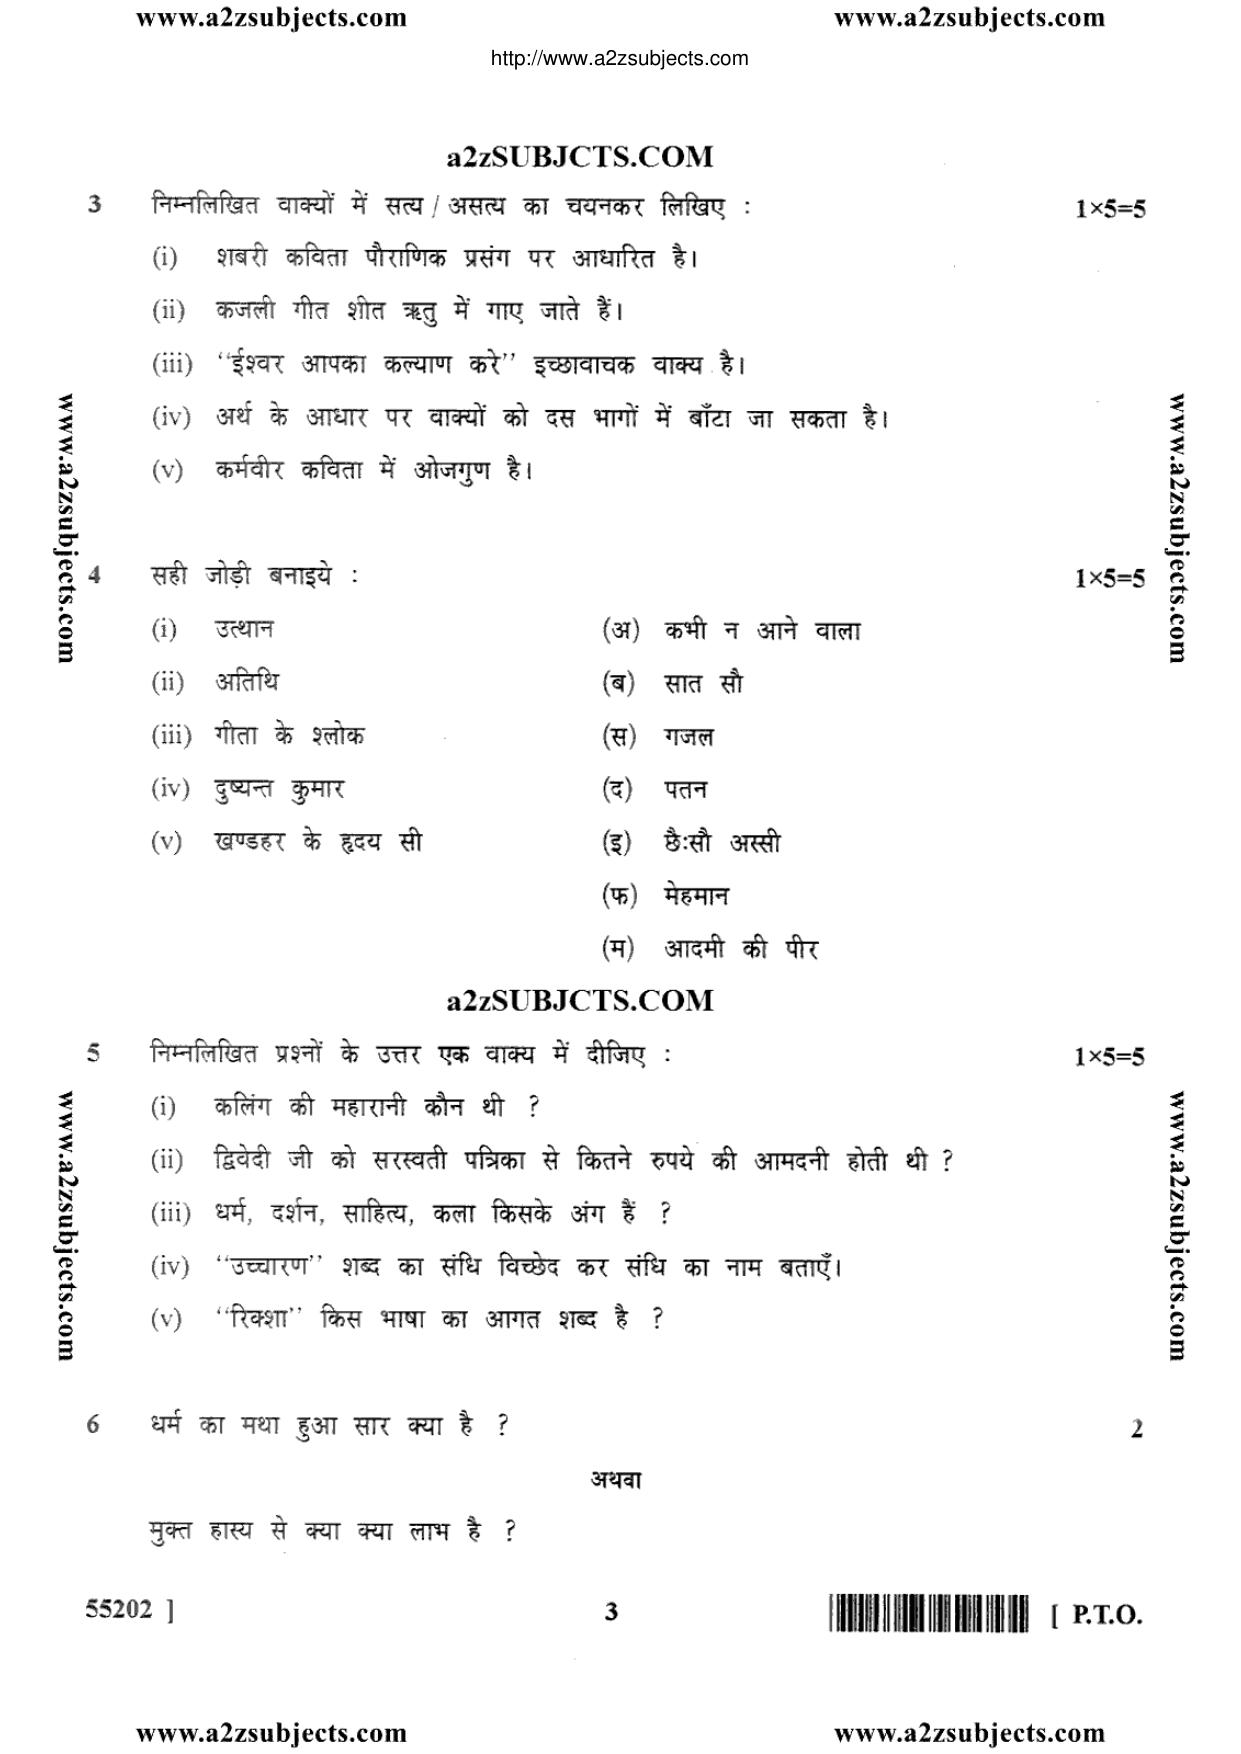 MP Board Class 10 Marathi 2017 Question Paper - Page 3